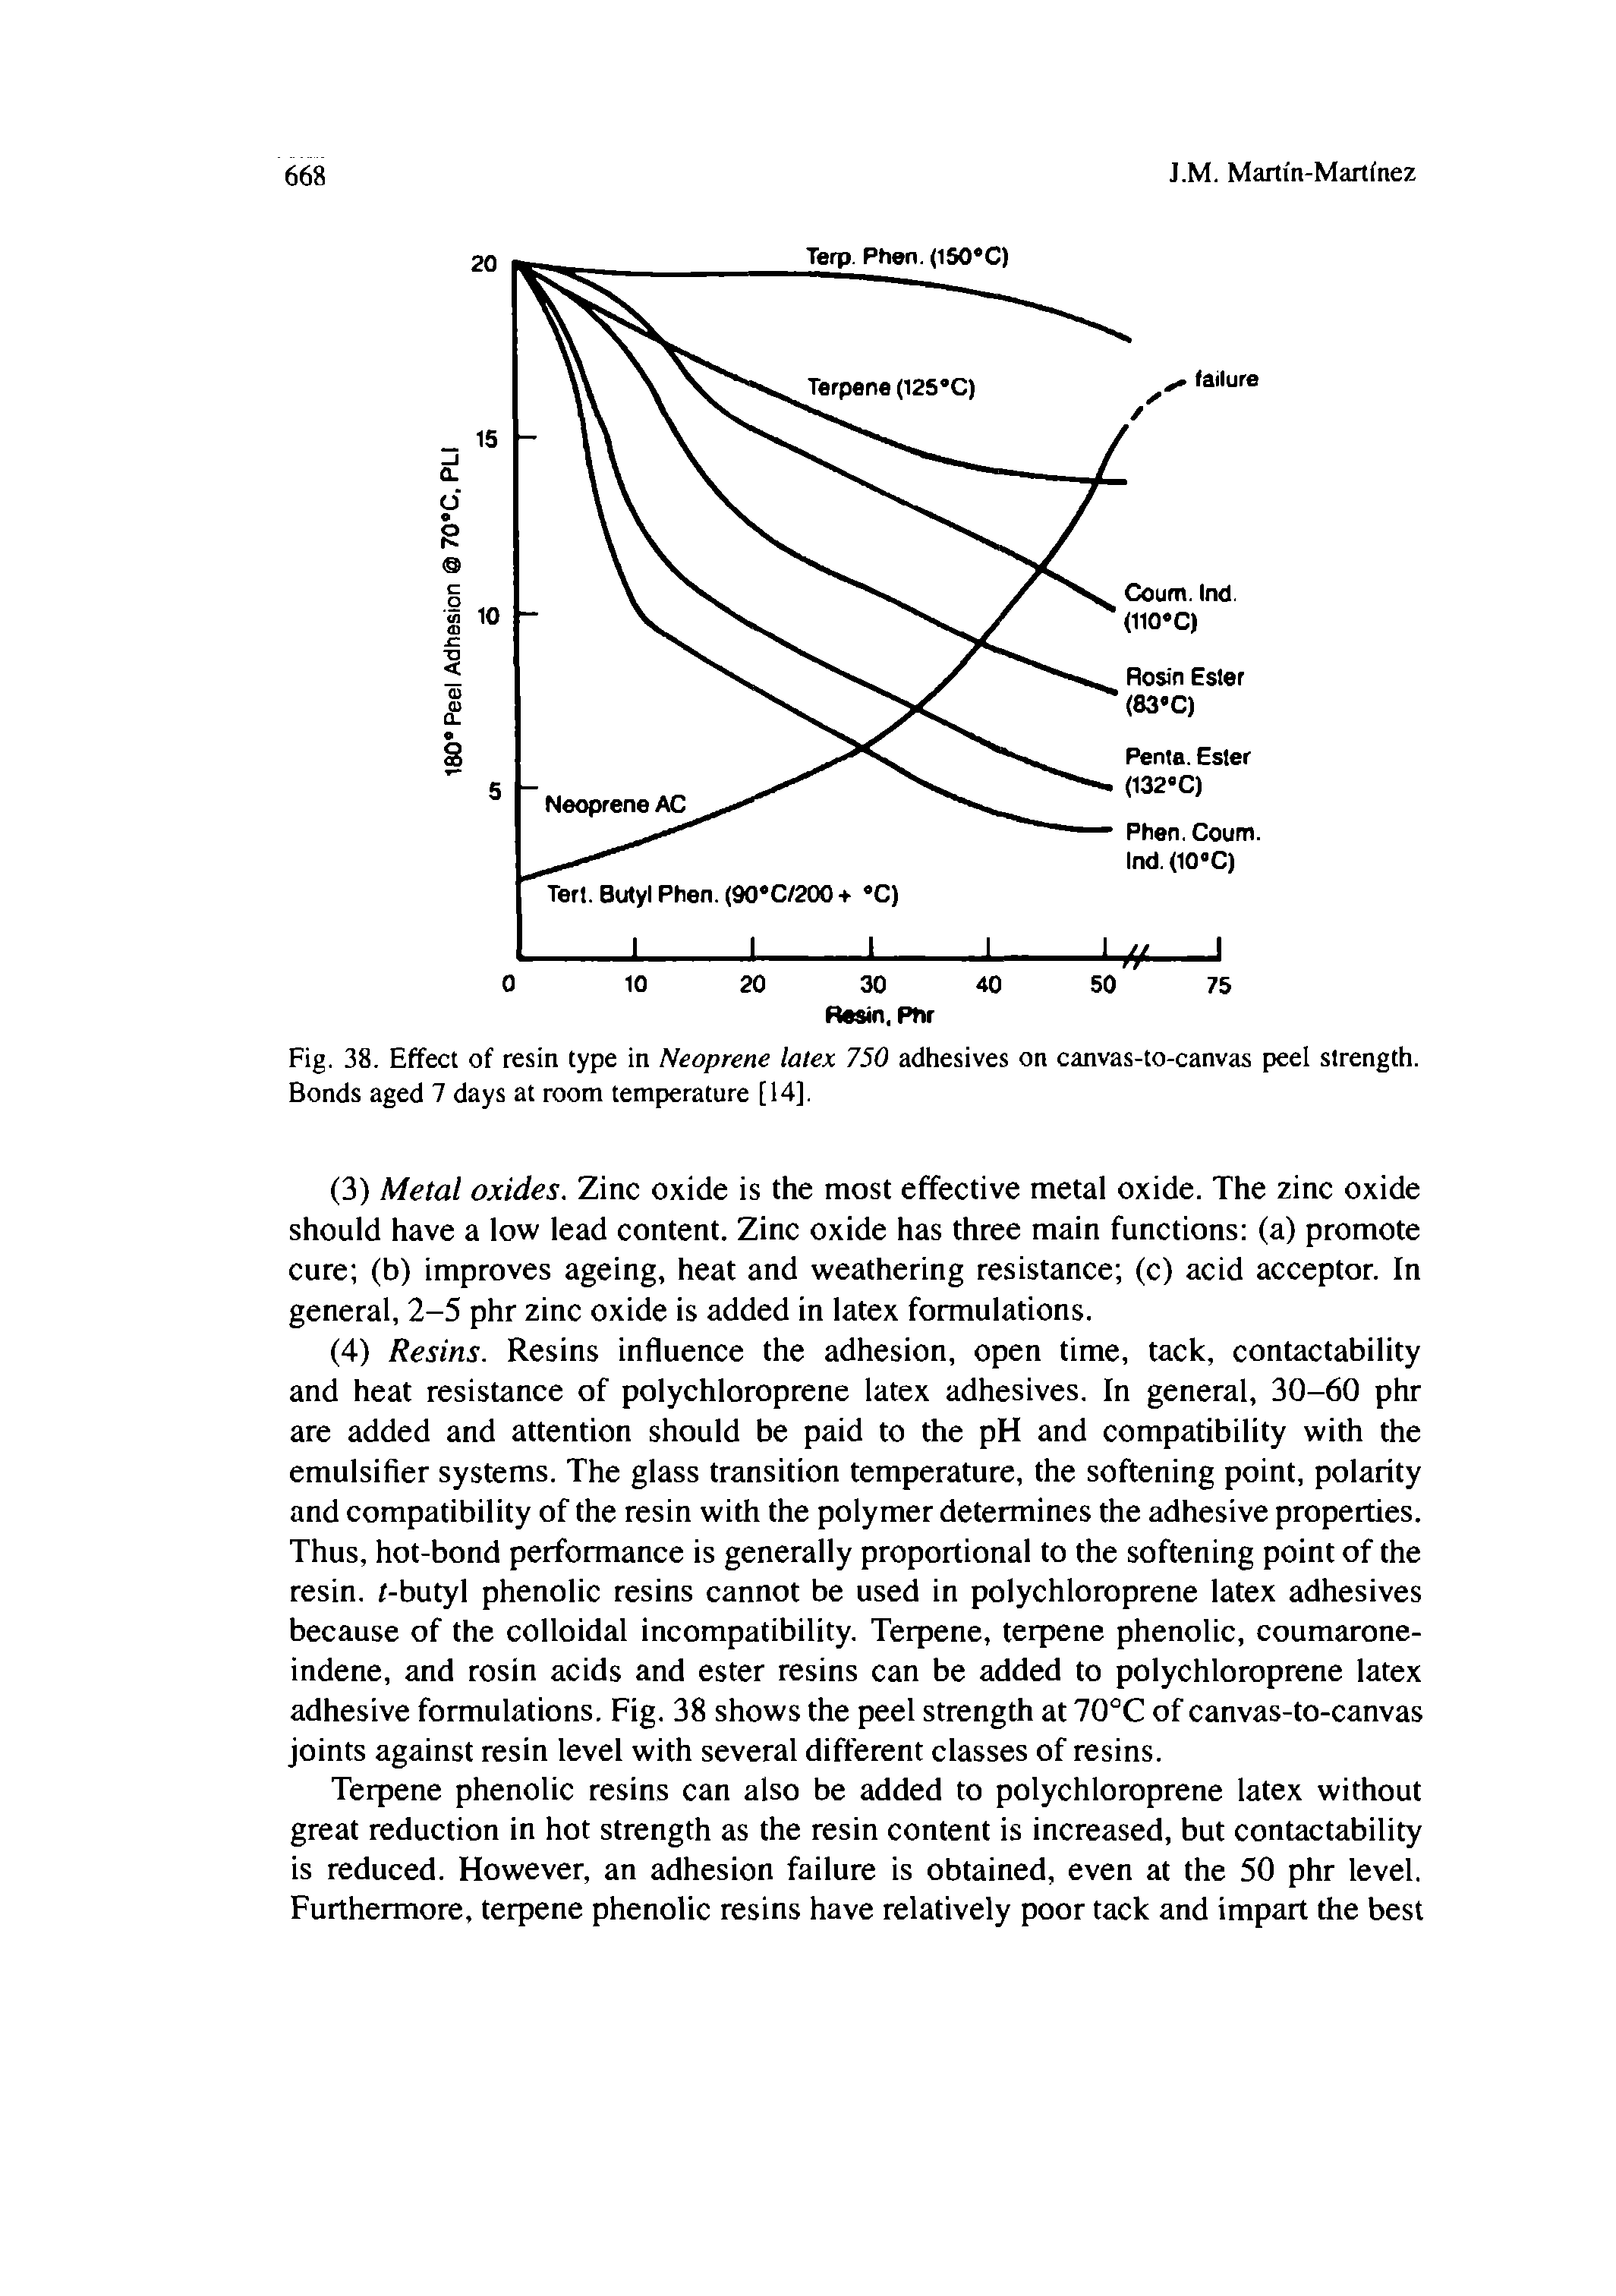 Fig. 38. Effect of resin type in Neoprene latex 750 adhesives on canvas-to-canvas peel strength. Bonds aged 7 days at room temperature [14].